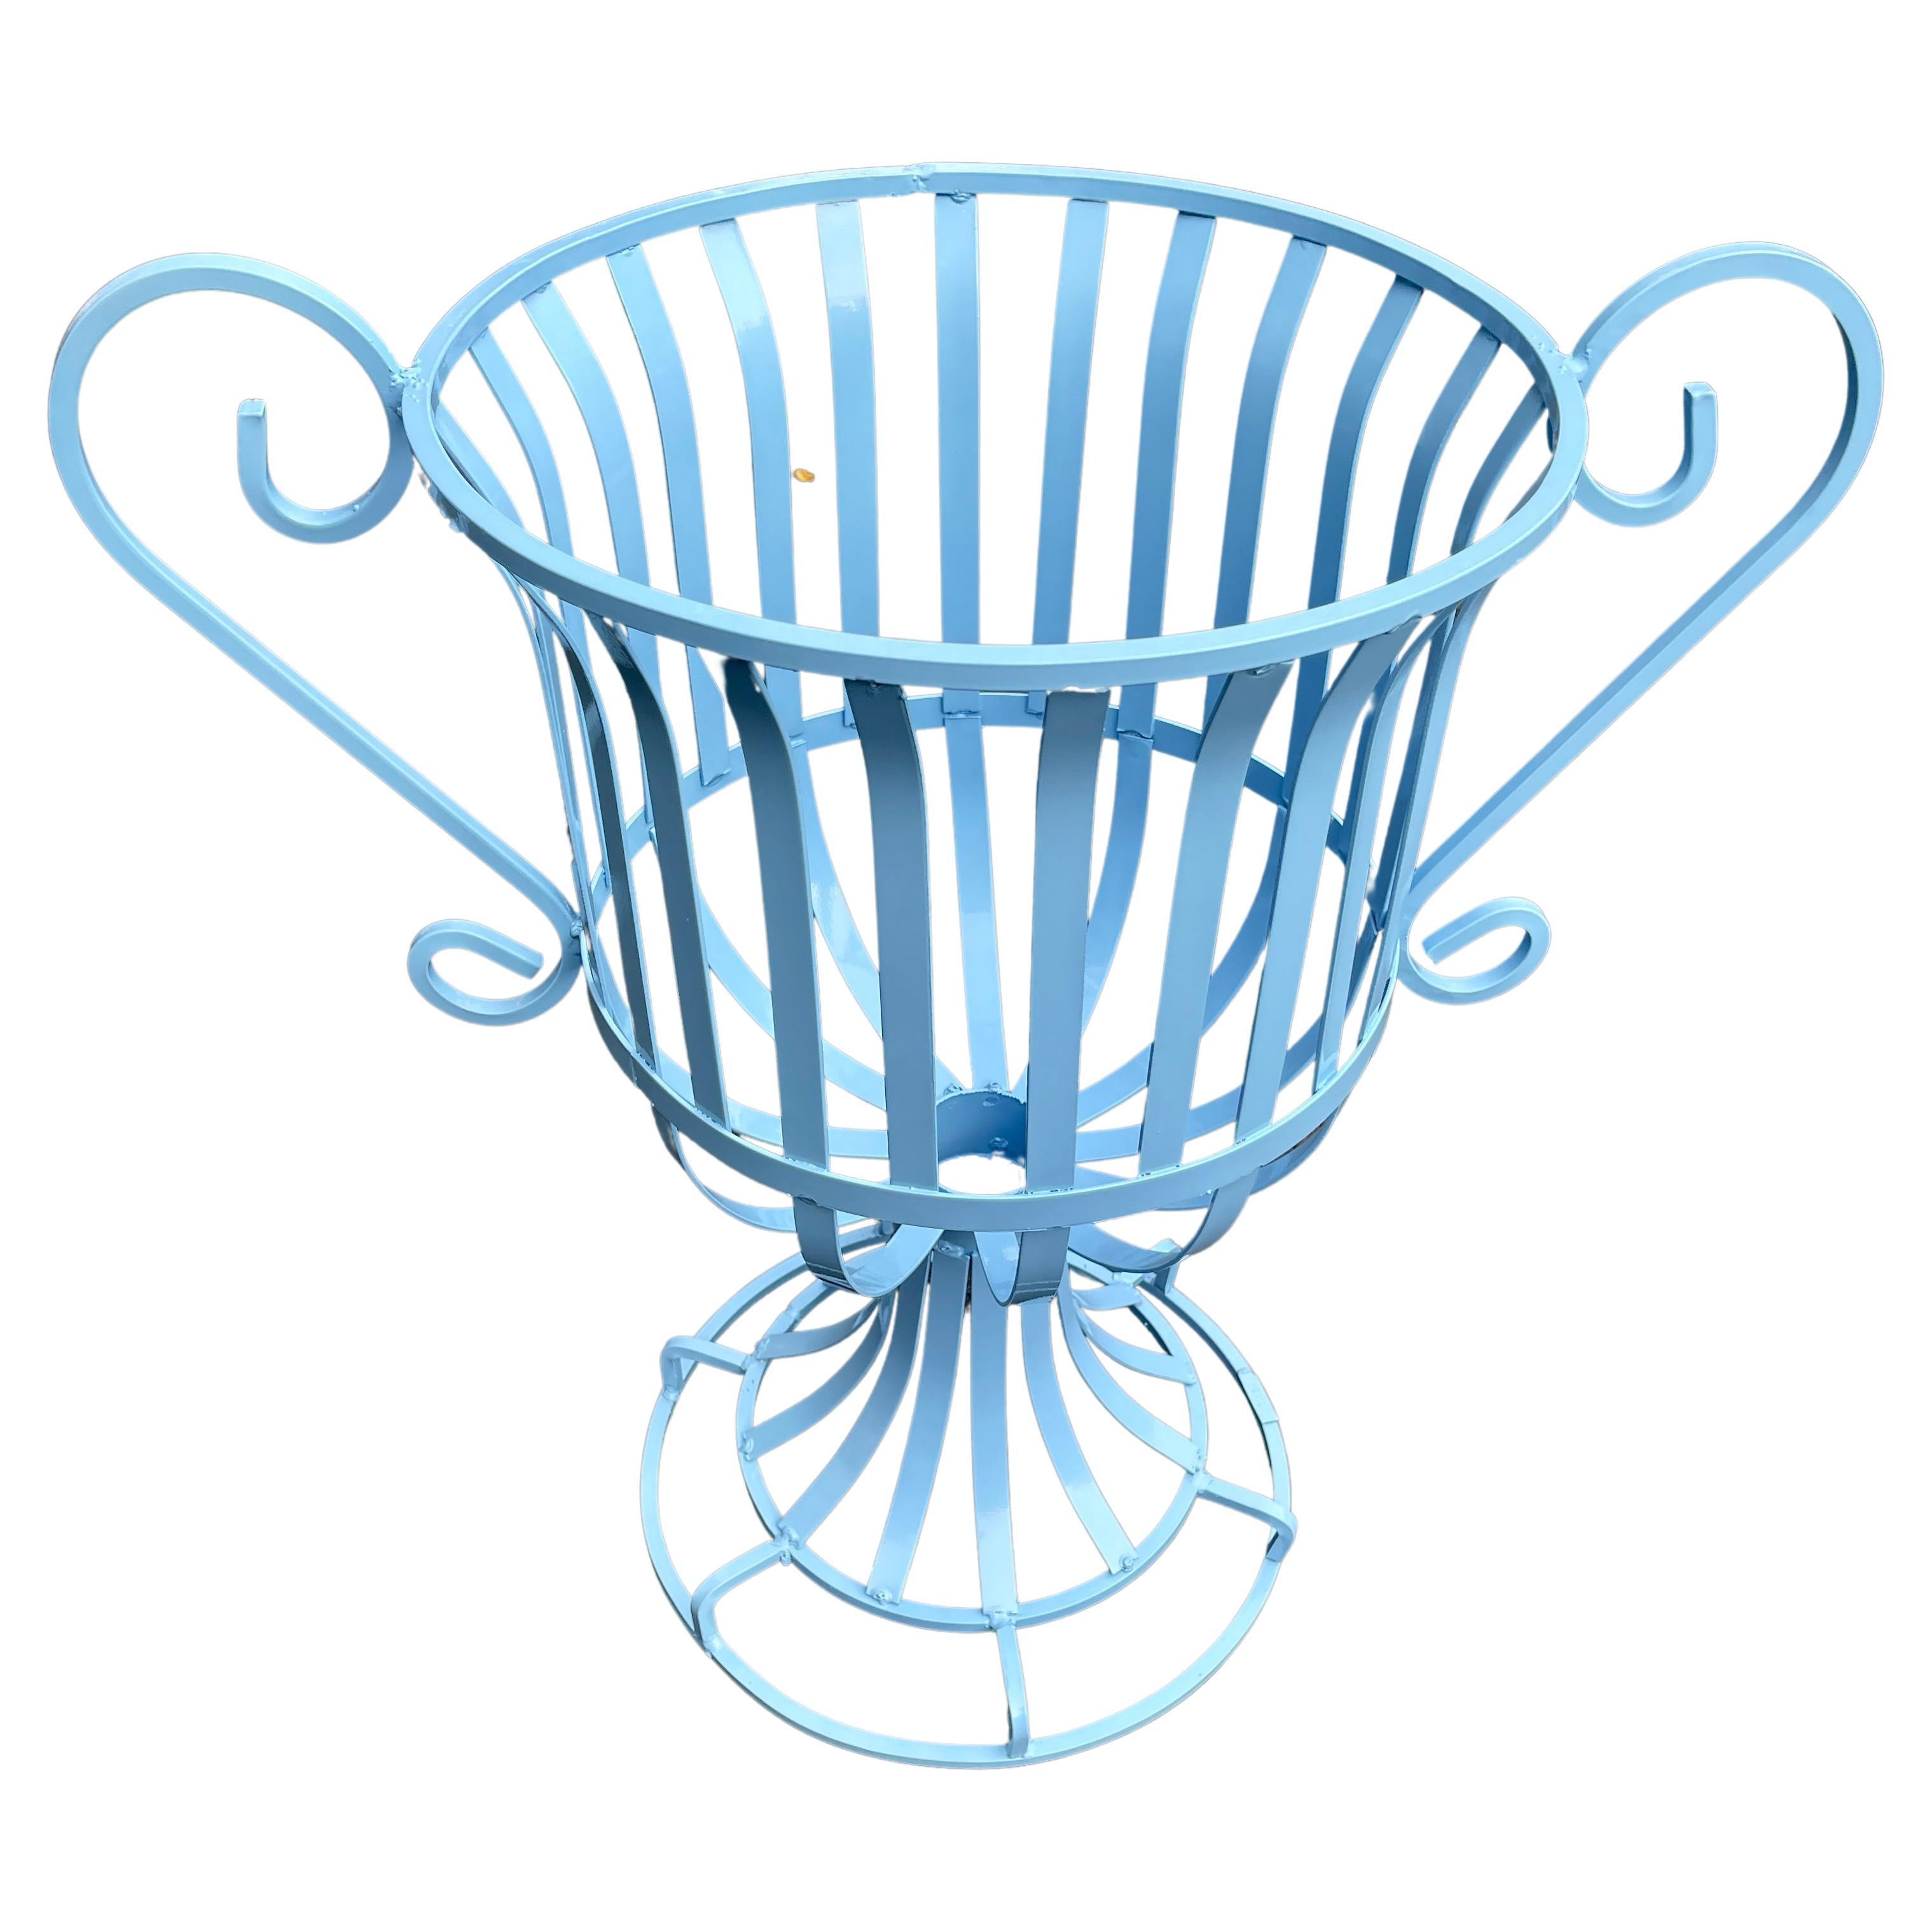 Large outdoor garden or patio blue cachepot flower or plant pot holder stand.
The metal stand is newly powder-coated in a Tiffany blue that can be changed and re-done into any color available.
 